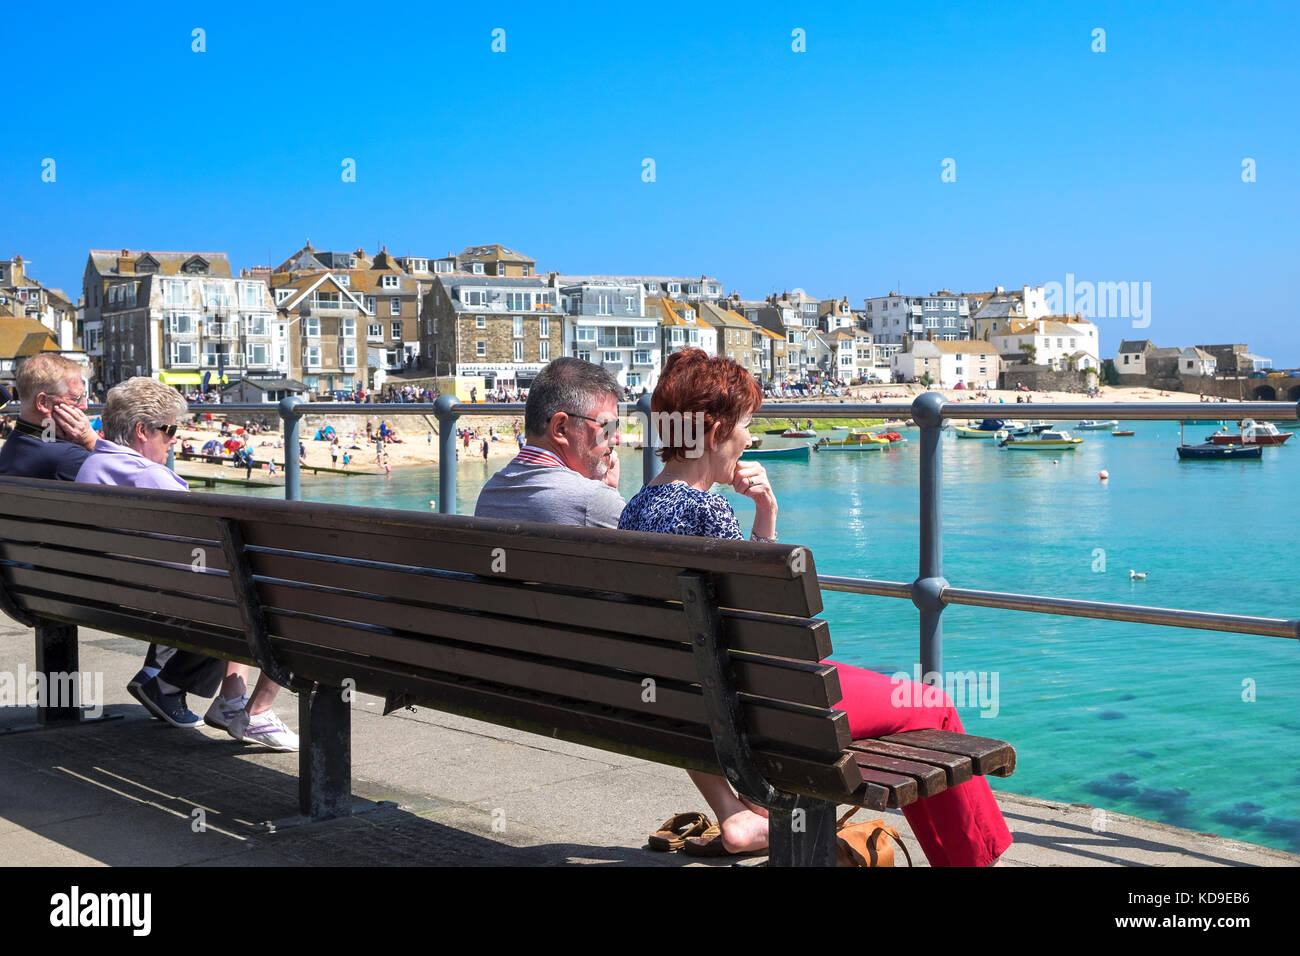 visitors on a summers day around the harbour in st.ives, cornwall, england, britain, uk, Stock Photo